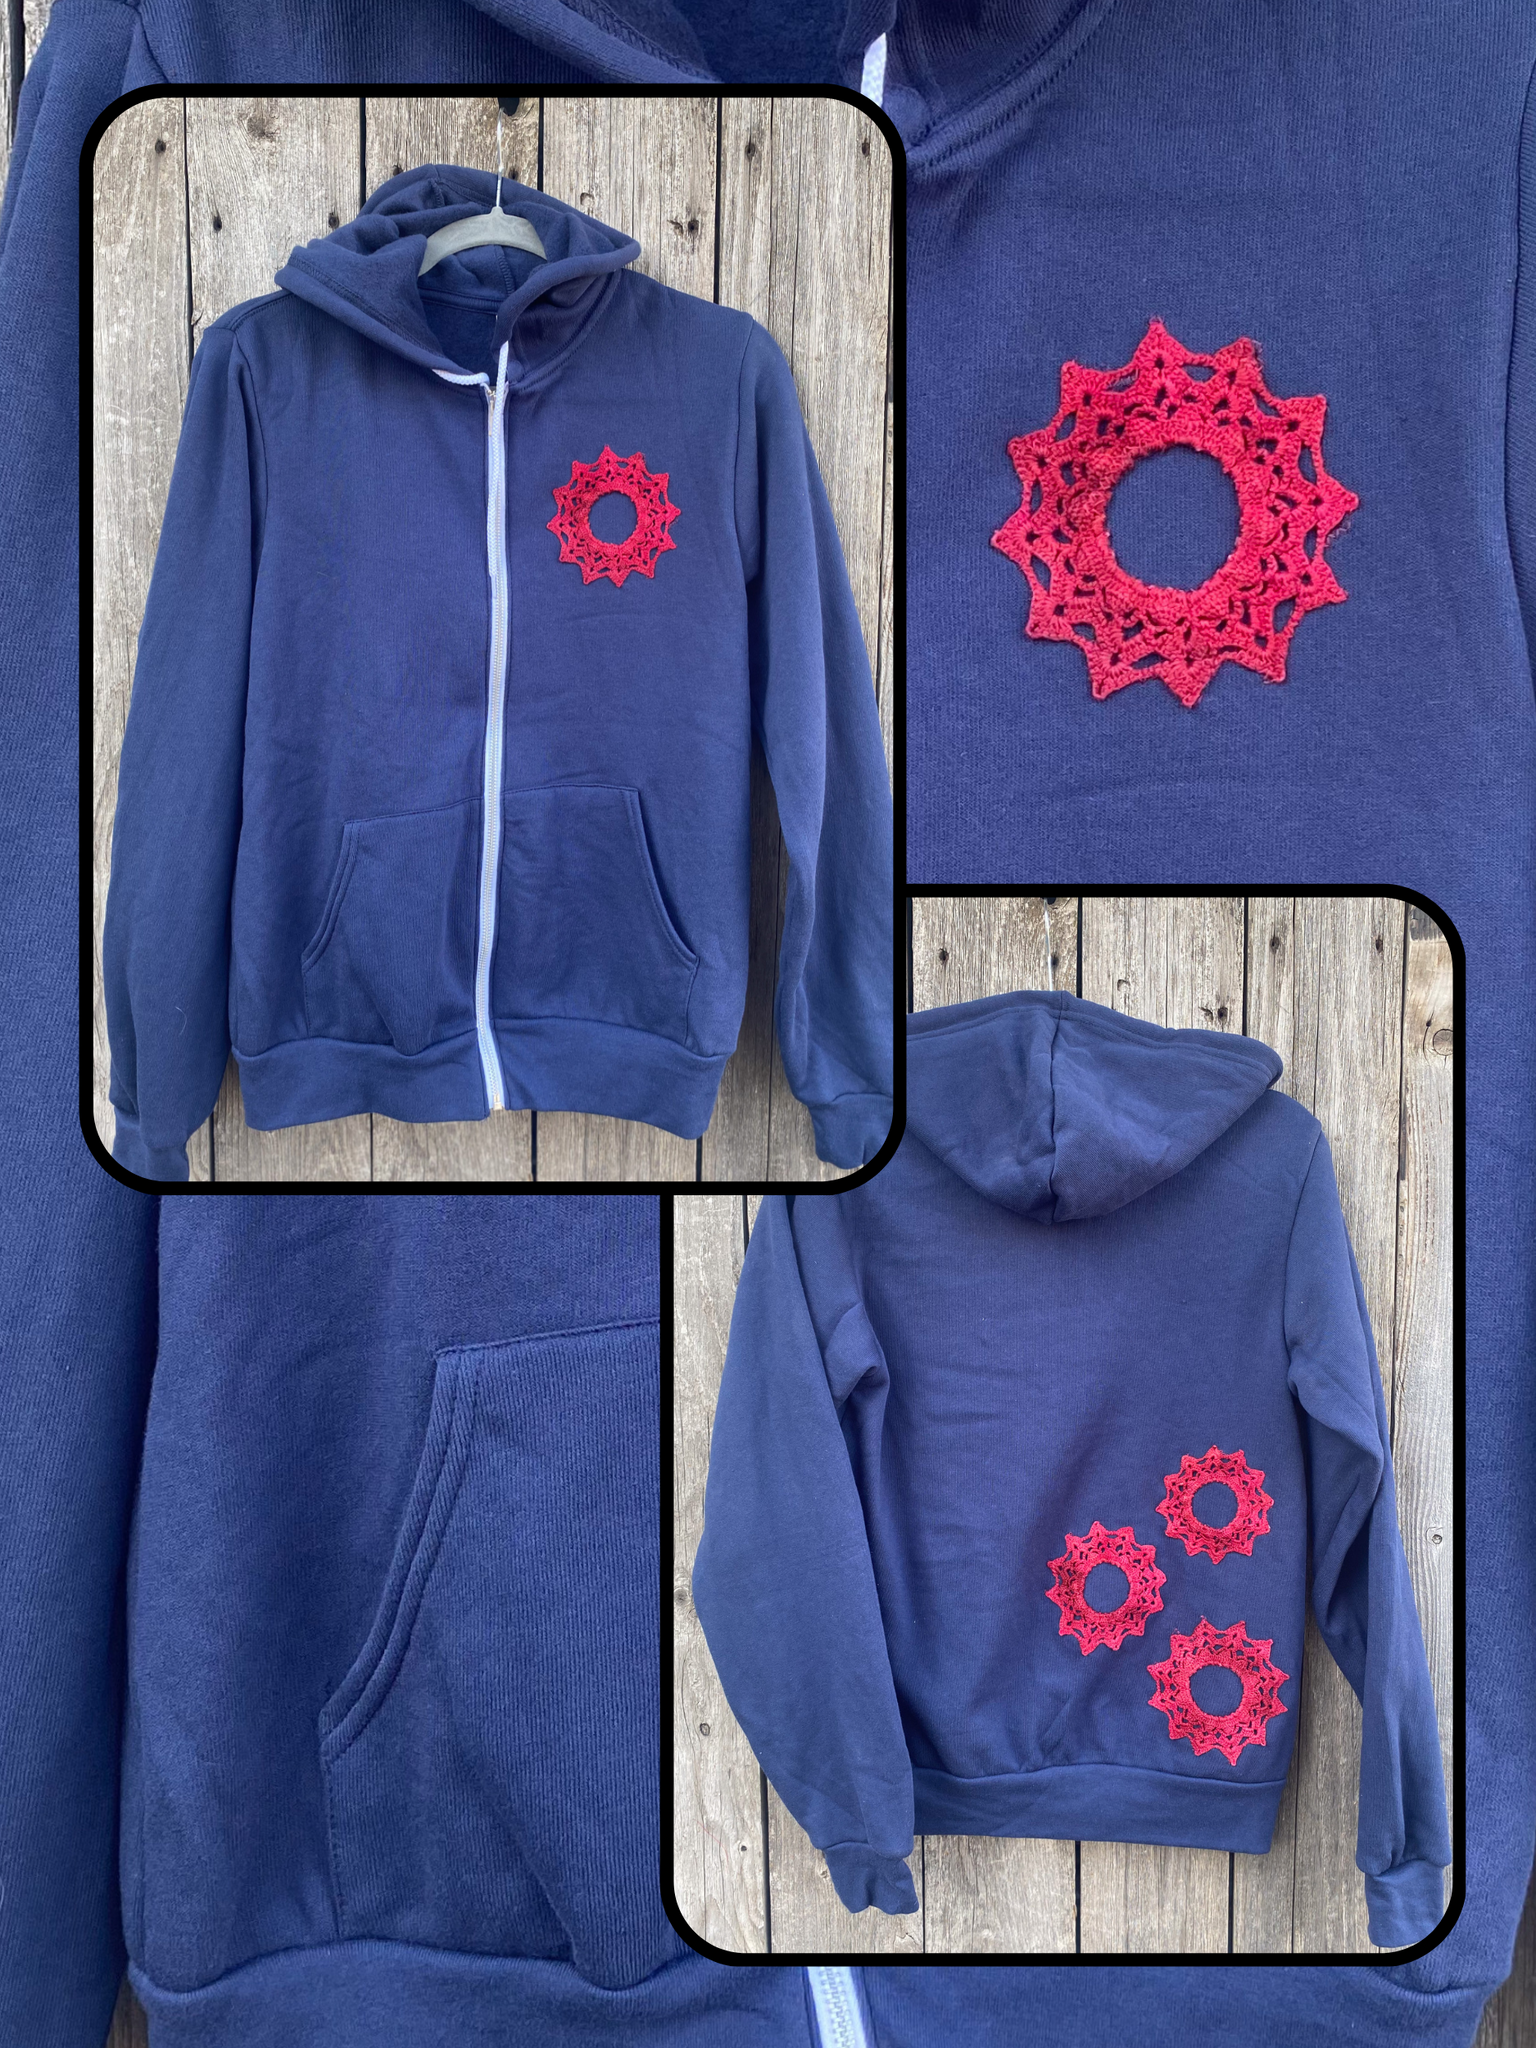 SMALL Upcycled Donut Doily Phish Zip Up Hoodie - 4 Donuts